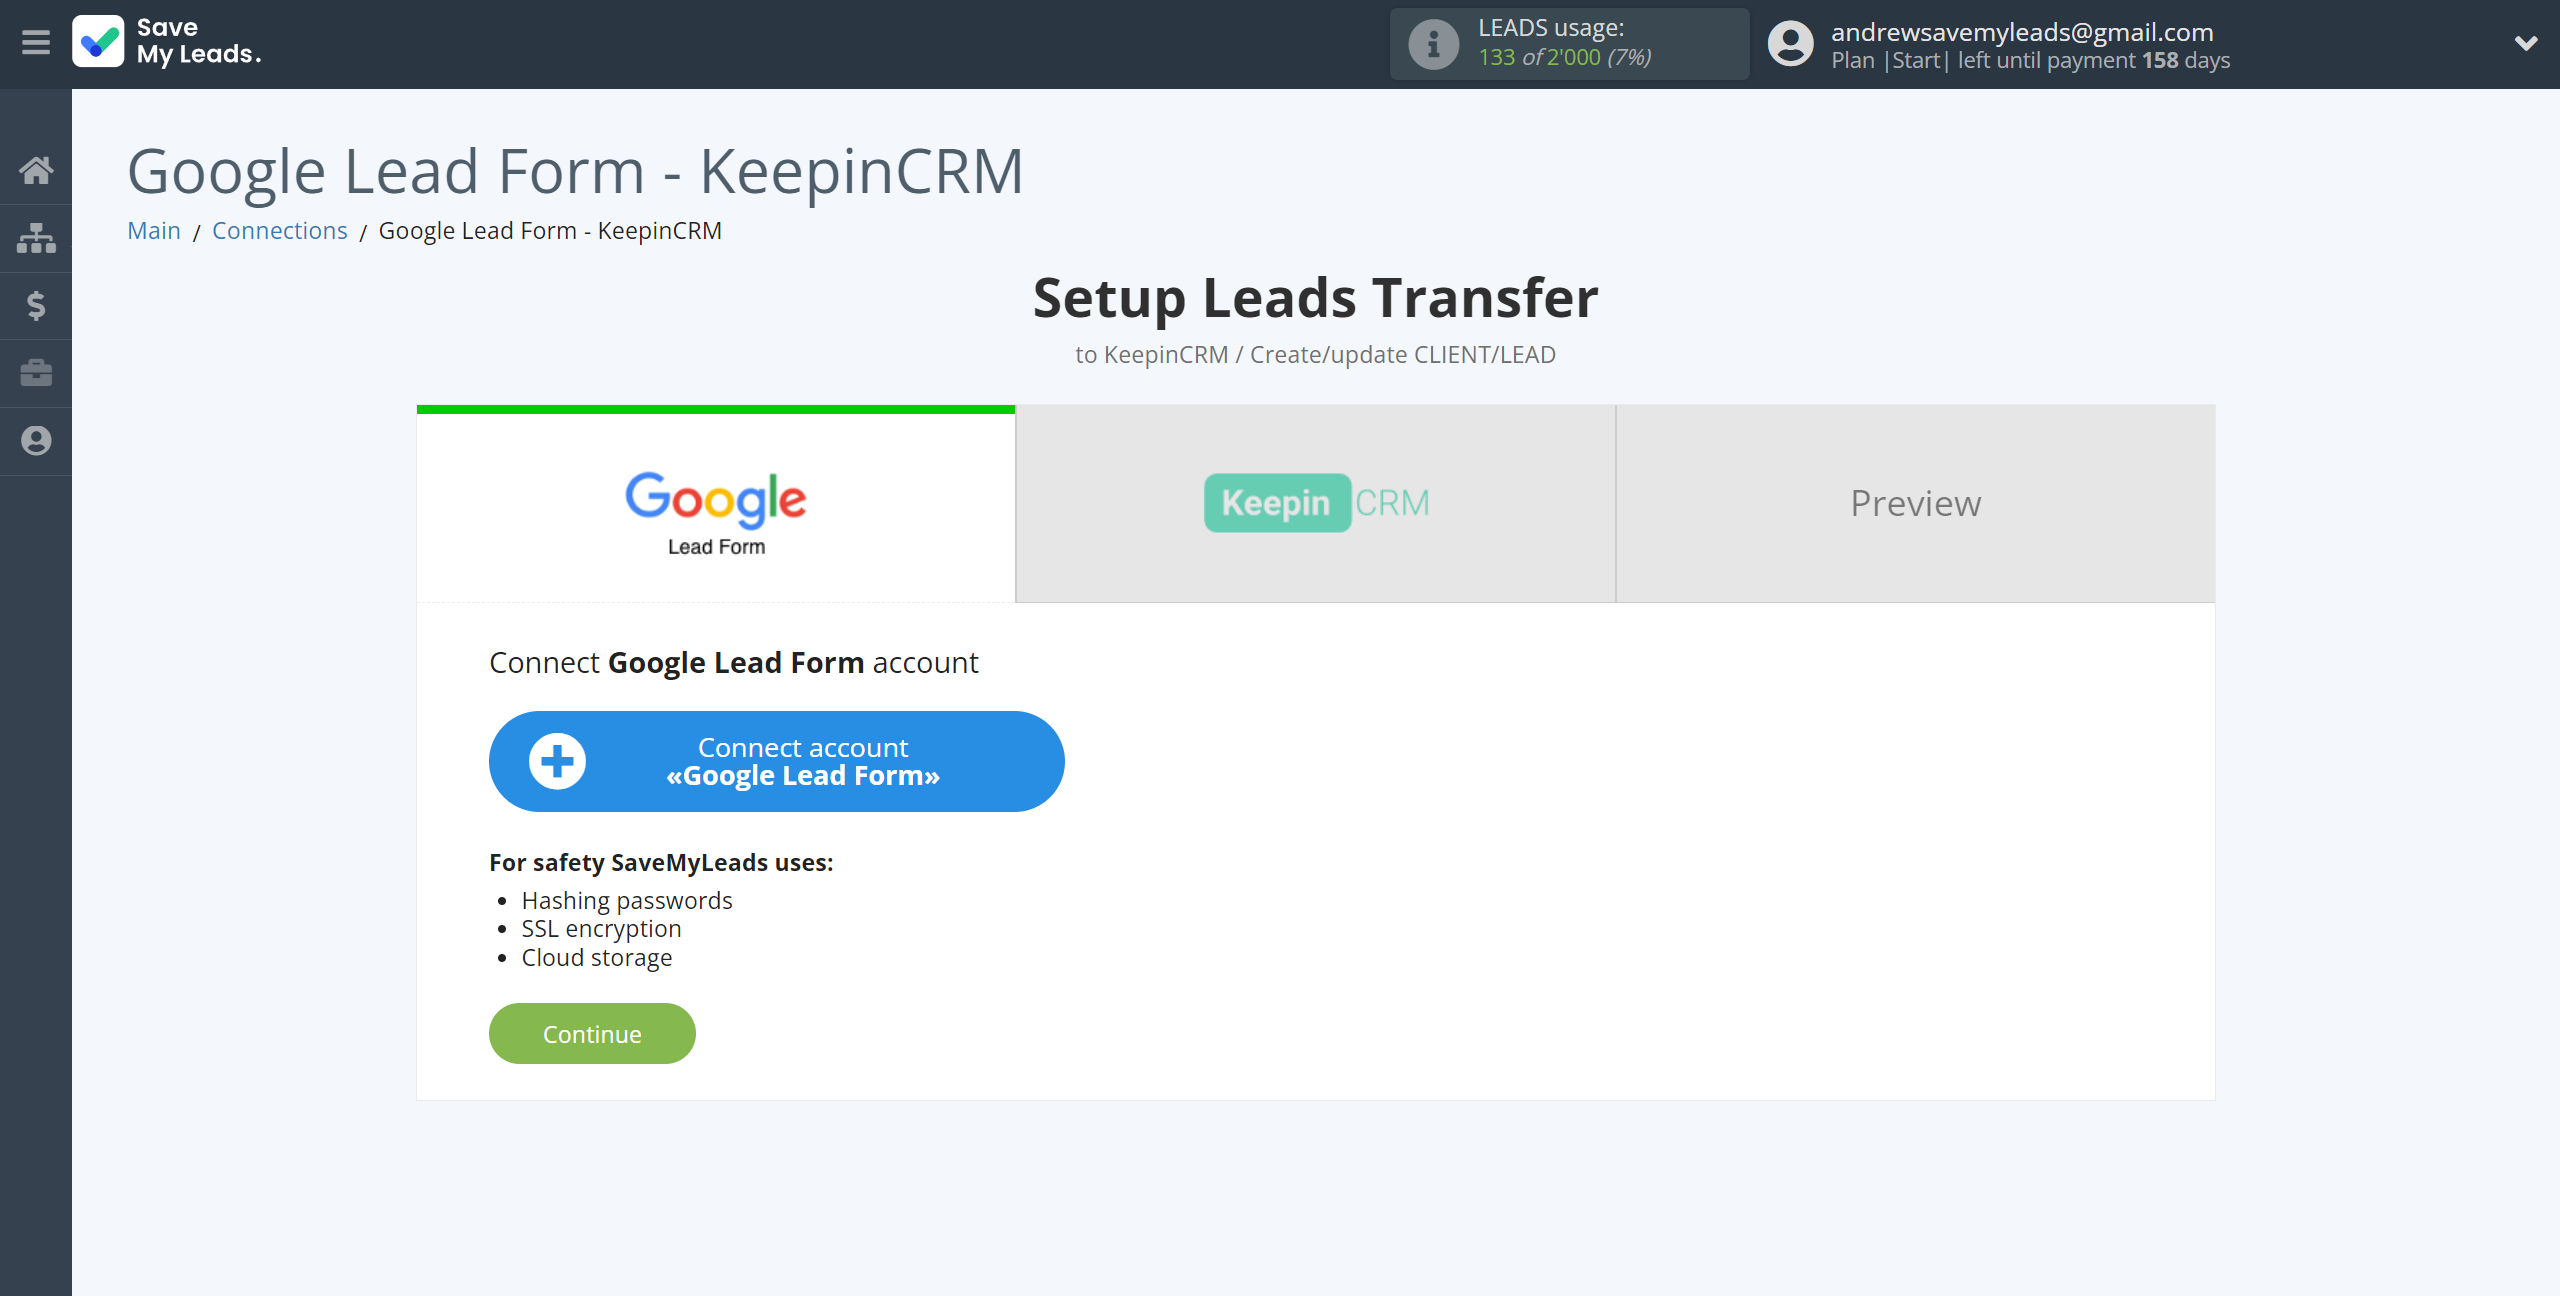 How to Connect Google Lead Form with KeepinCRM Create/update Client/Lead | Data Source account connection